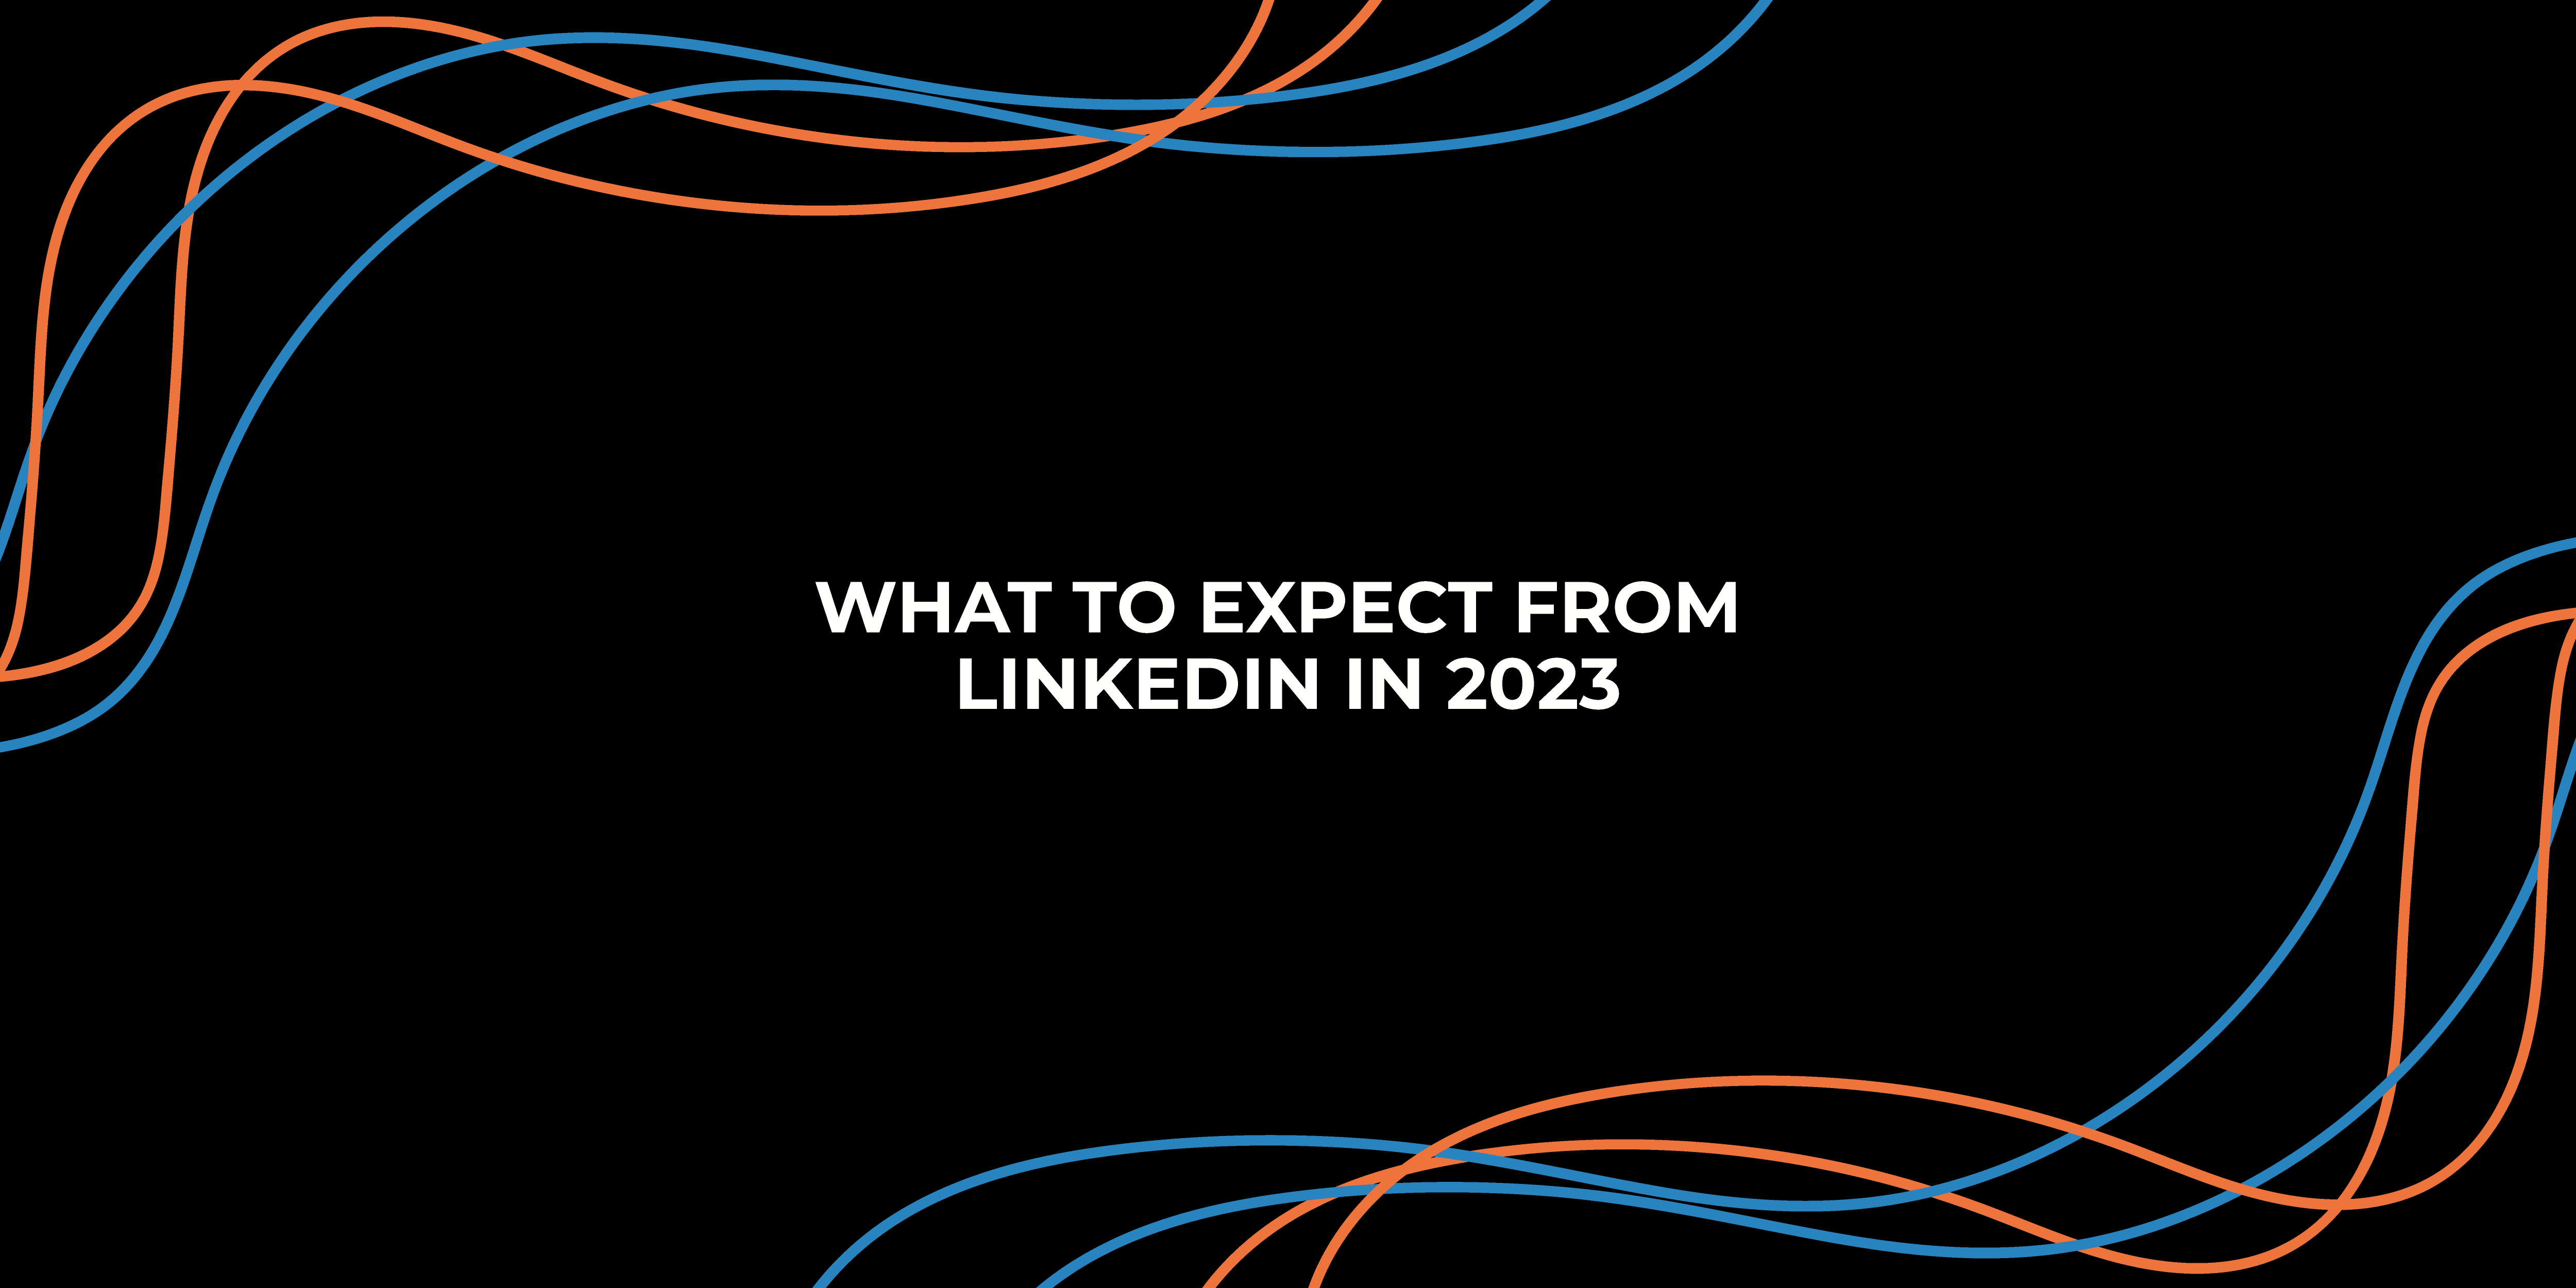 What to expect from linkedin in 2023